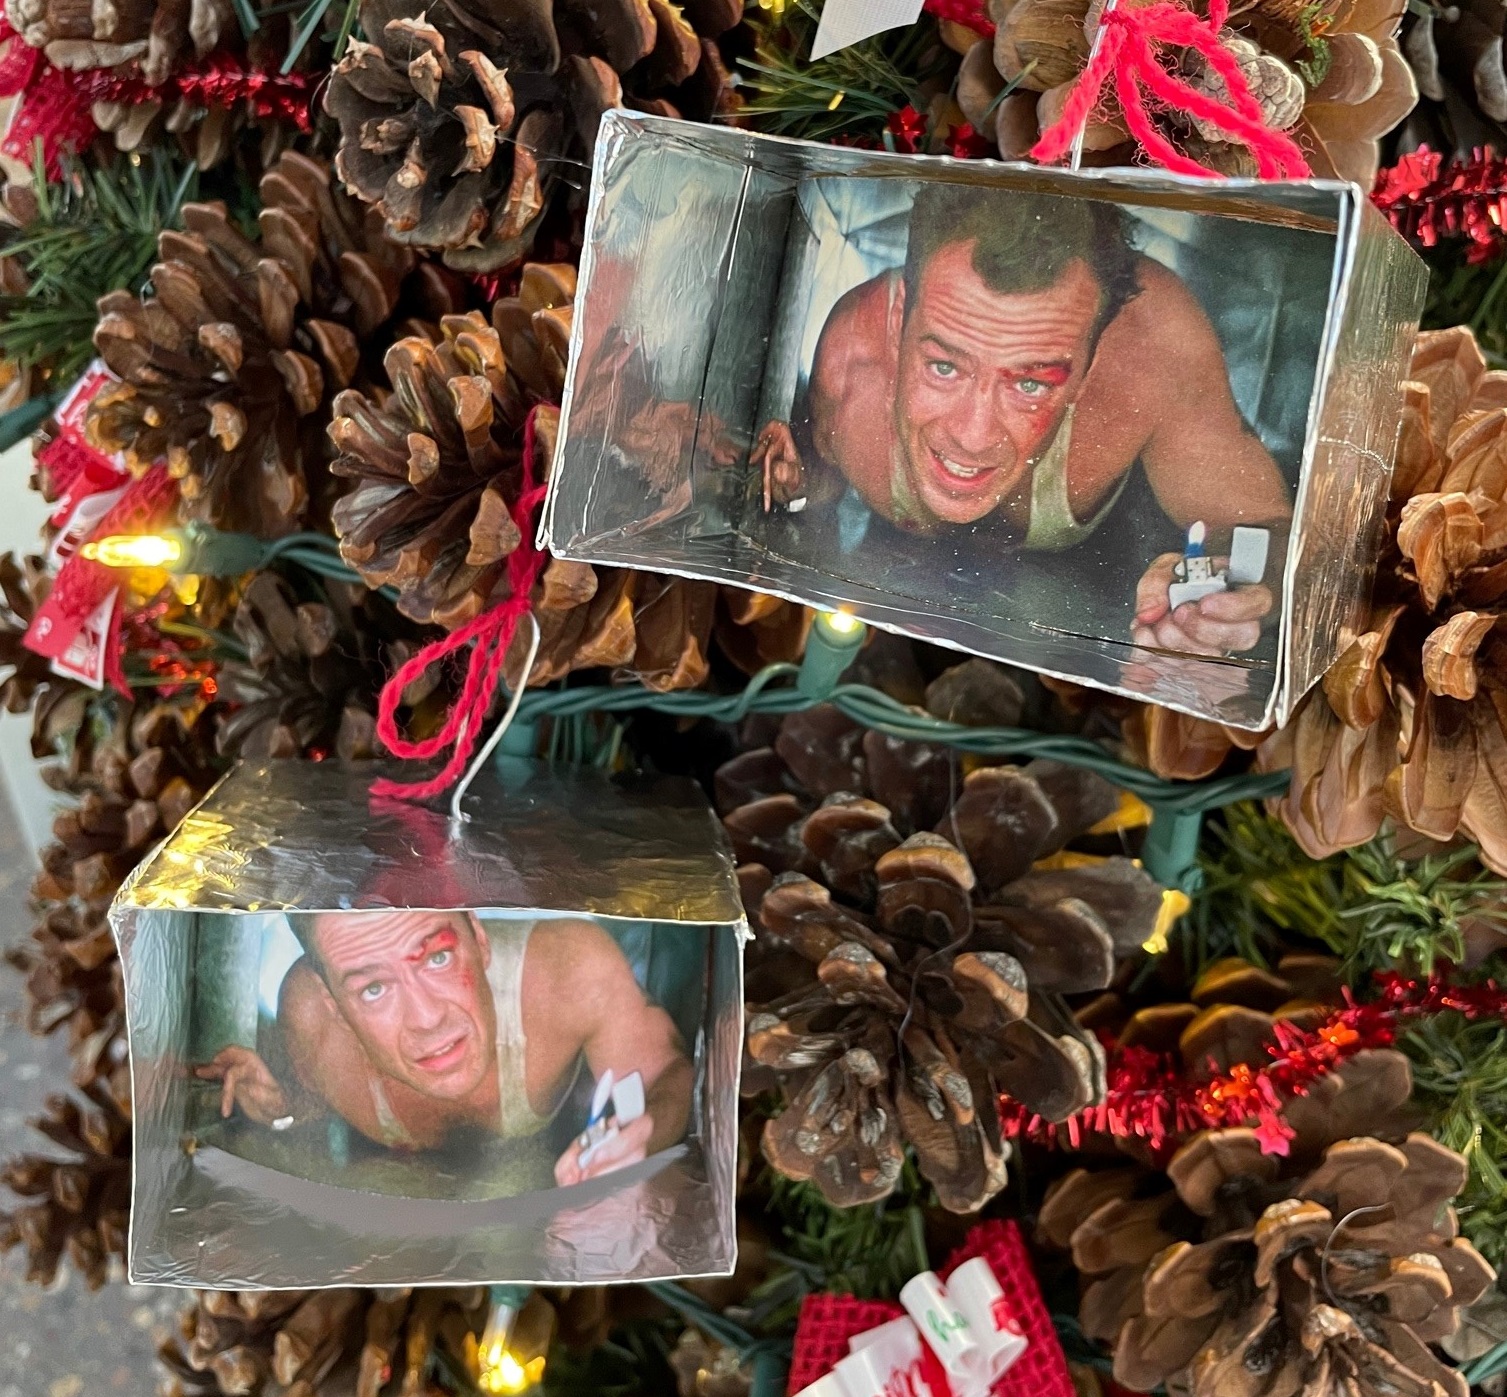 Tree with two ornaments that have photos of Bruce Willis crawling through a metal duct.  